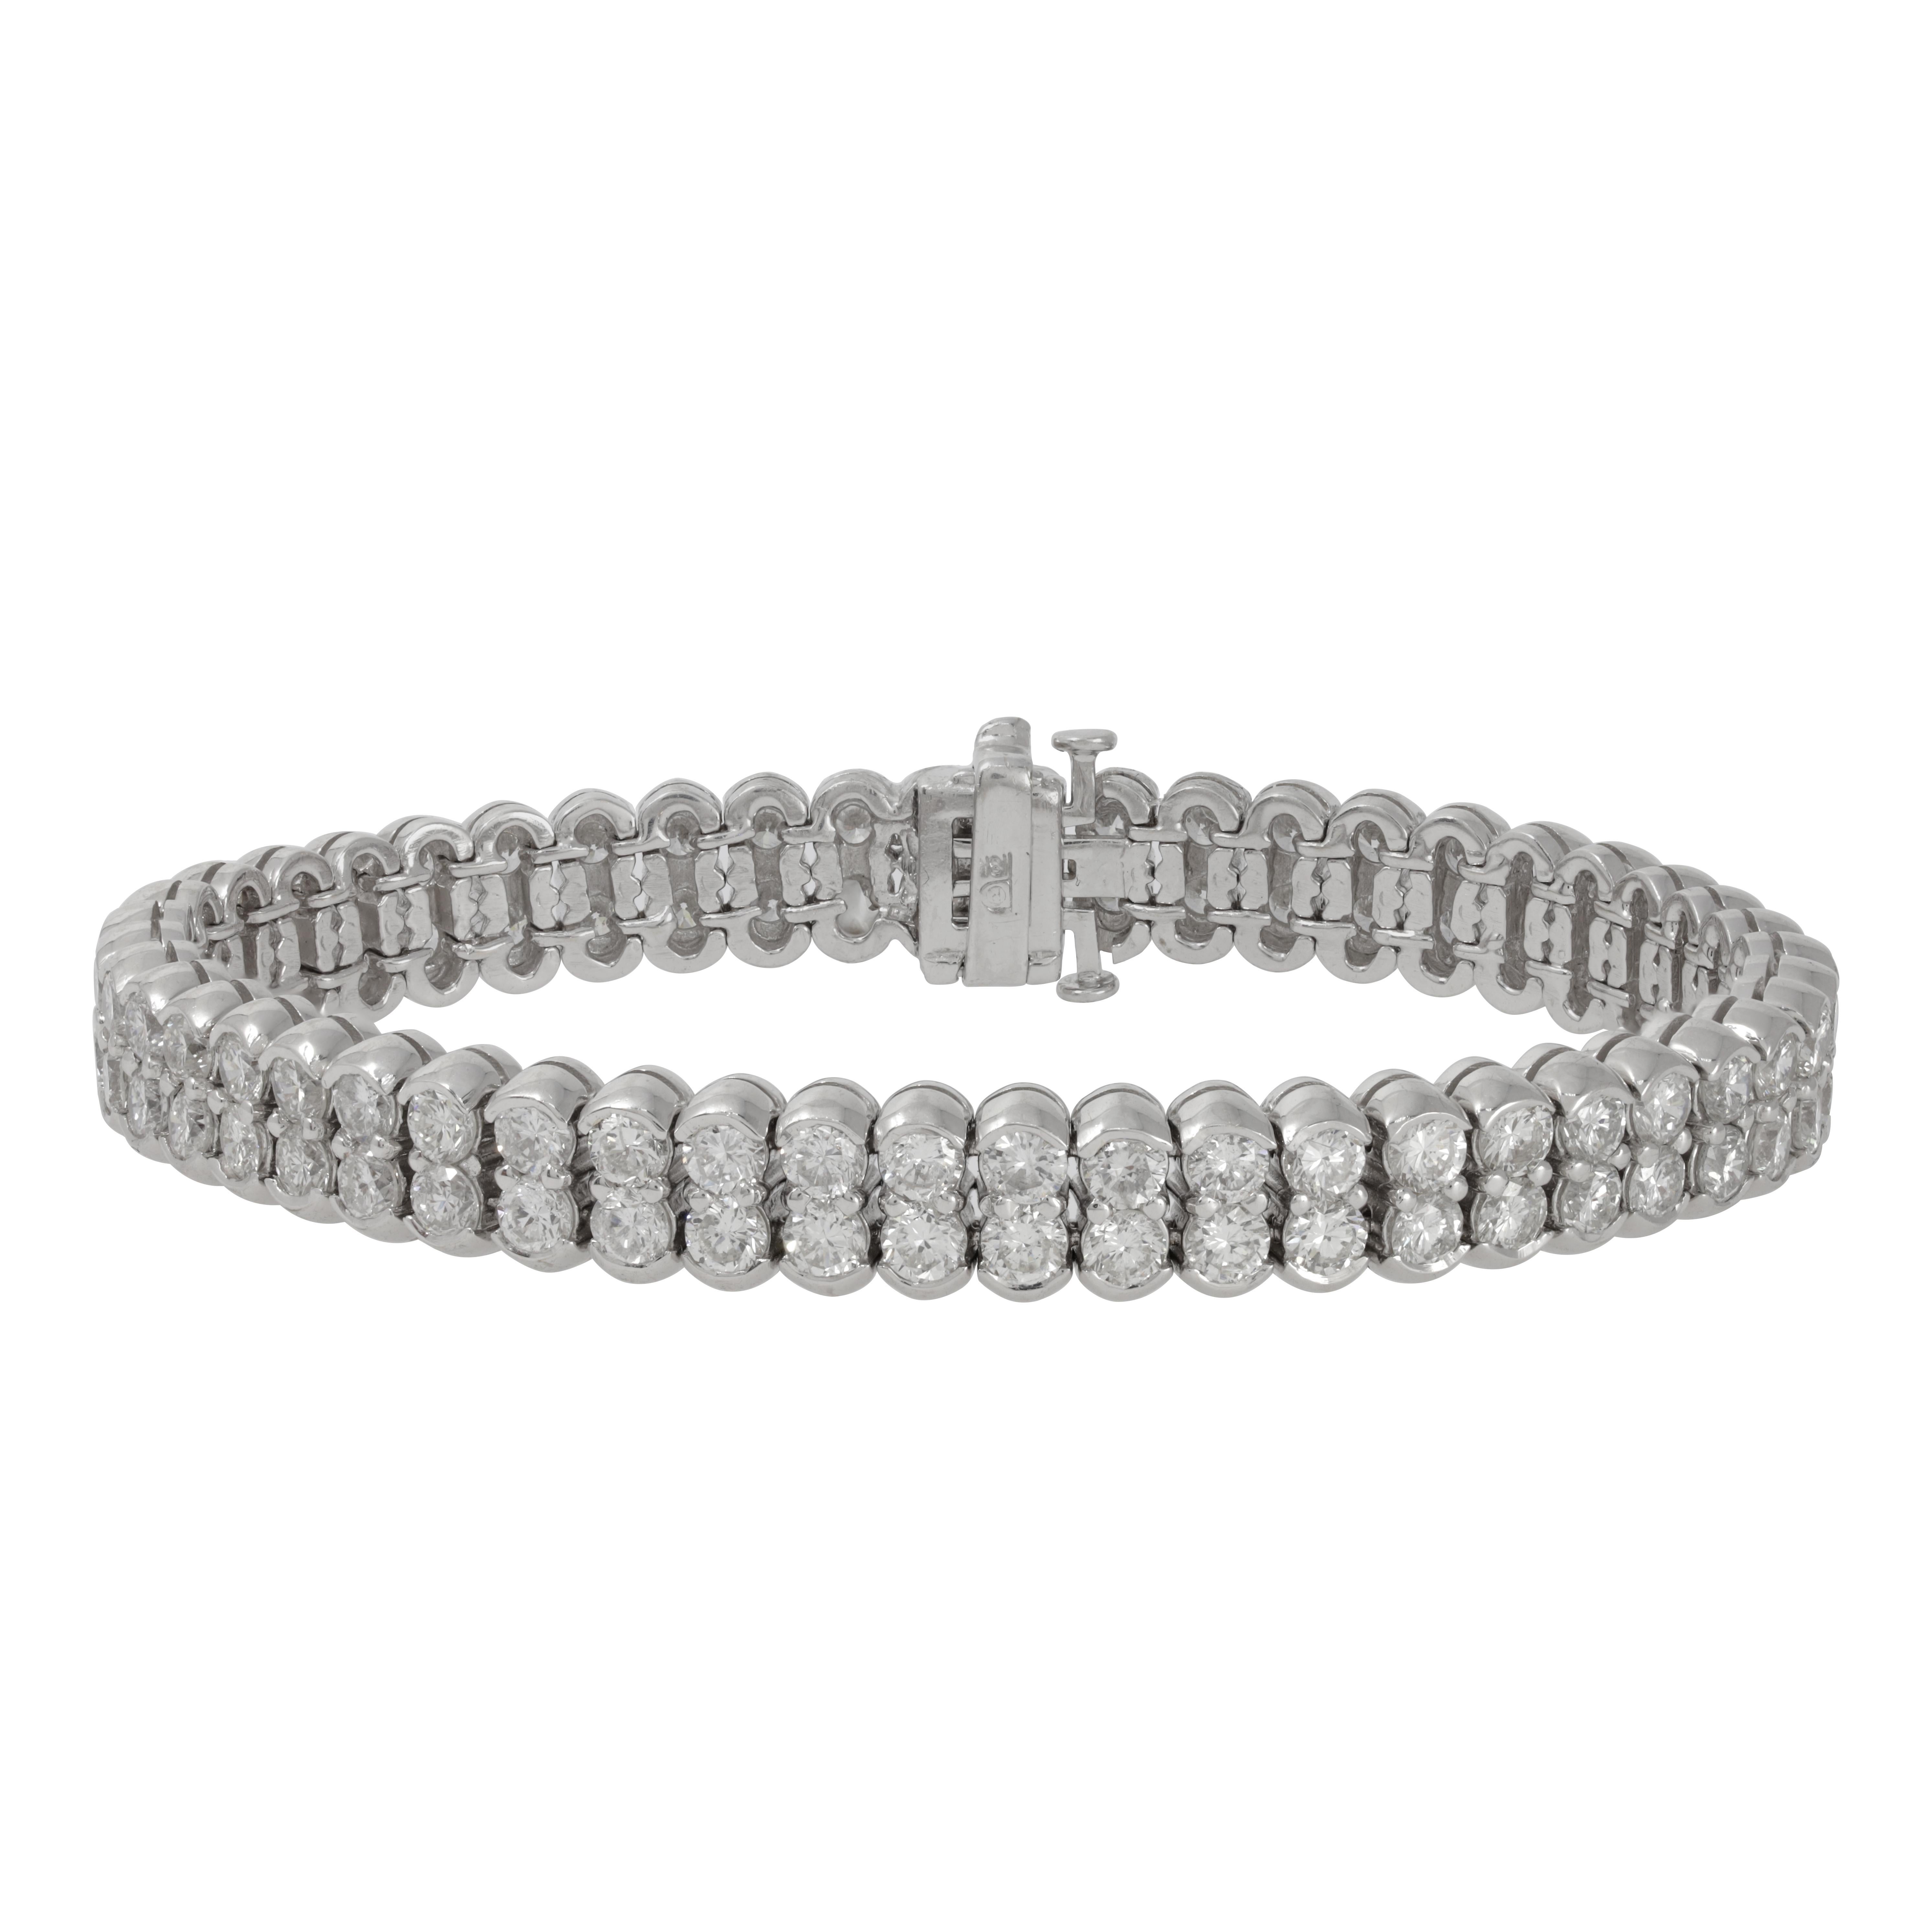 18kt white gold bracelet featuring 2 rows of 11.70 cts round diamonds
Diana M is one-stop shop for all your jewelry shopping, carrying line of diamond rings, earrings, bracelets, necklaces, and other fine jewelry.
We create our jewelry from